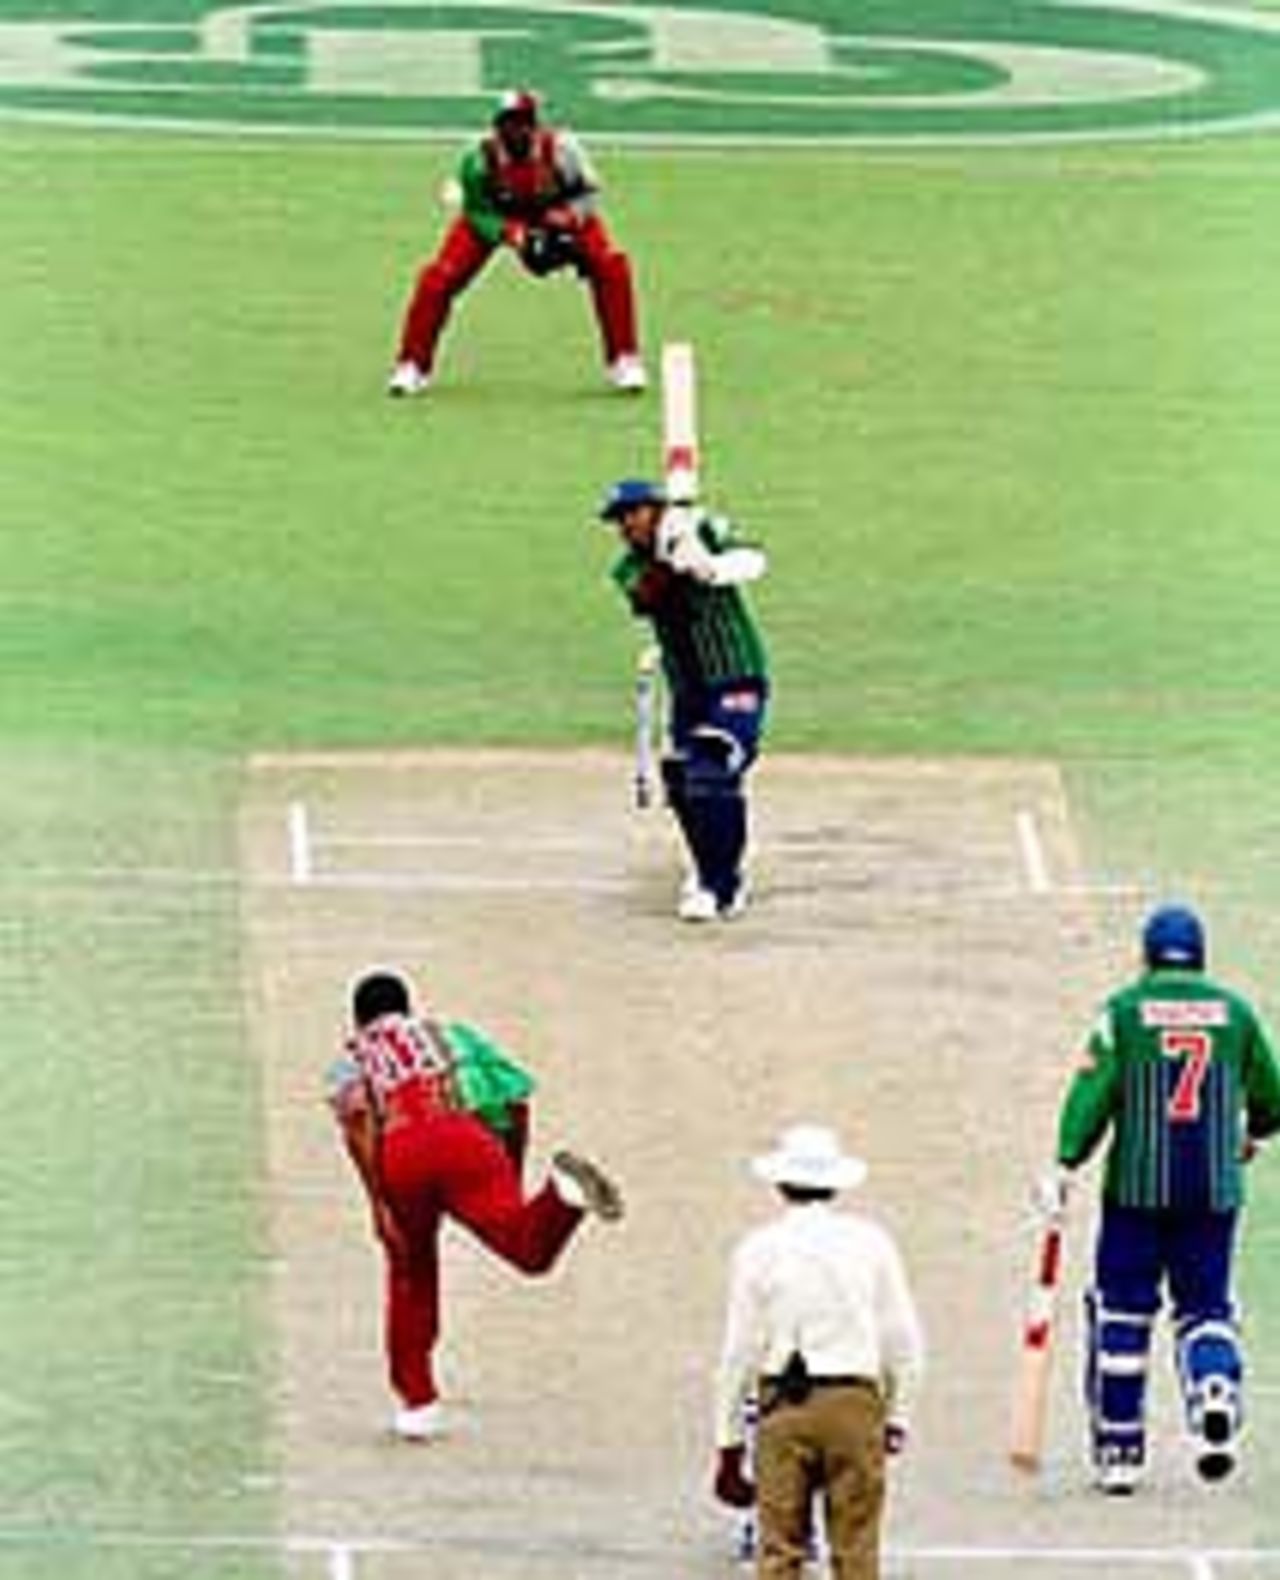 Pakistan v West Indies, Carlton and United Series, match 14, 17 December 1996, Adelaide